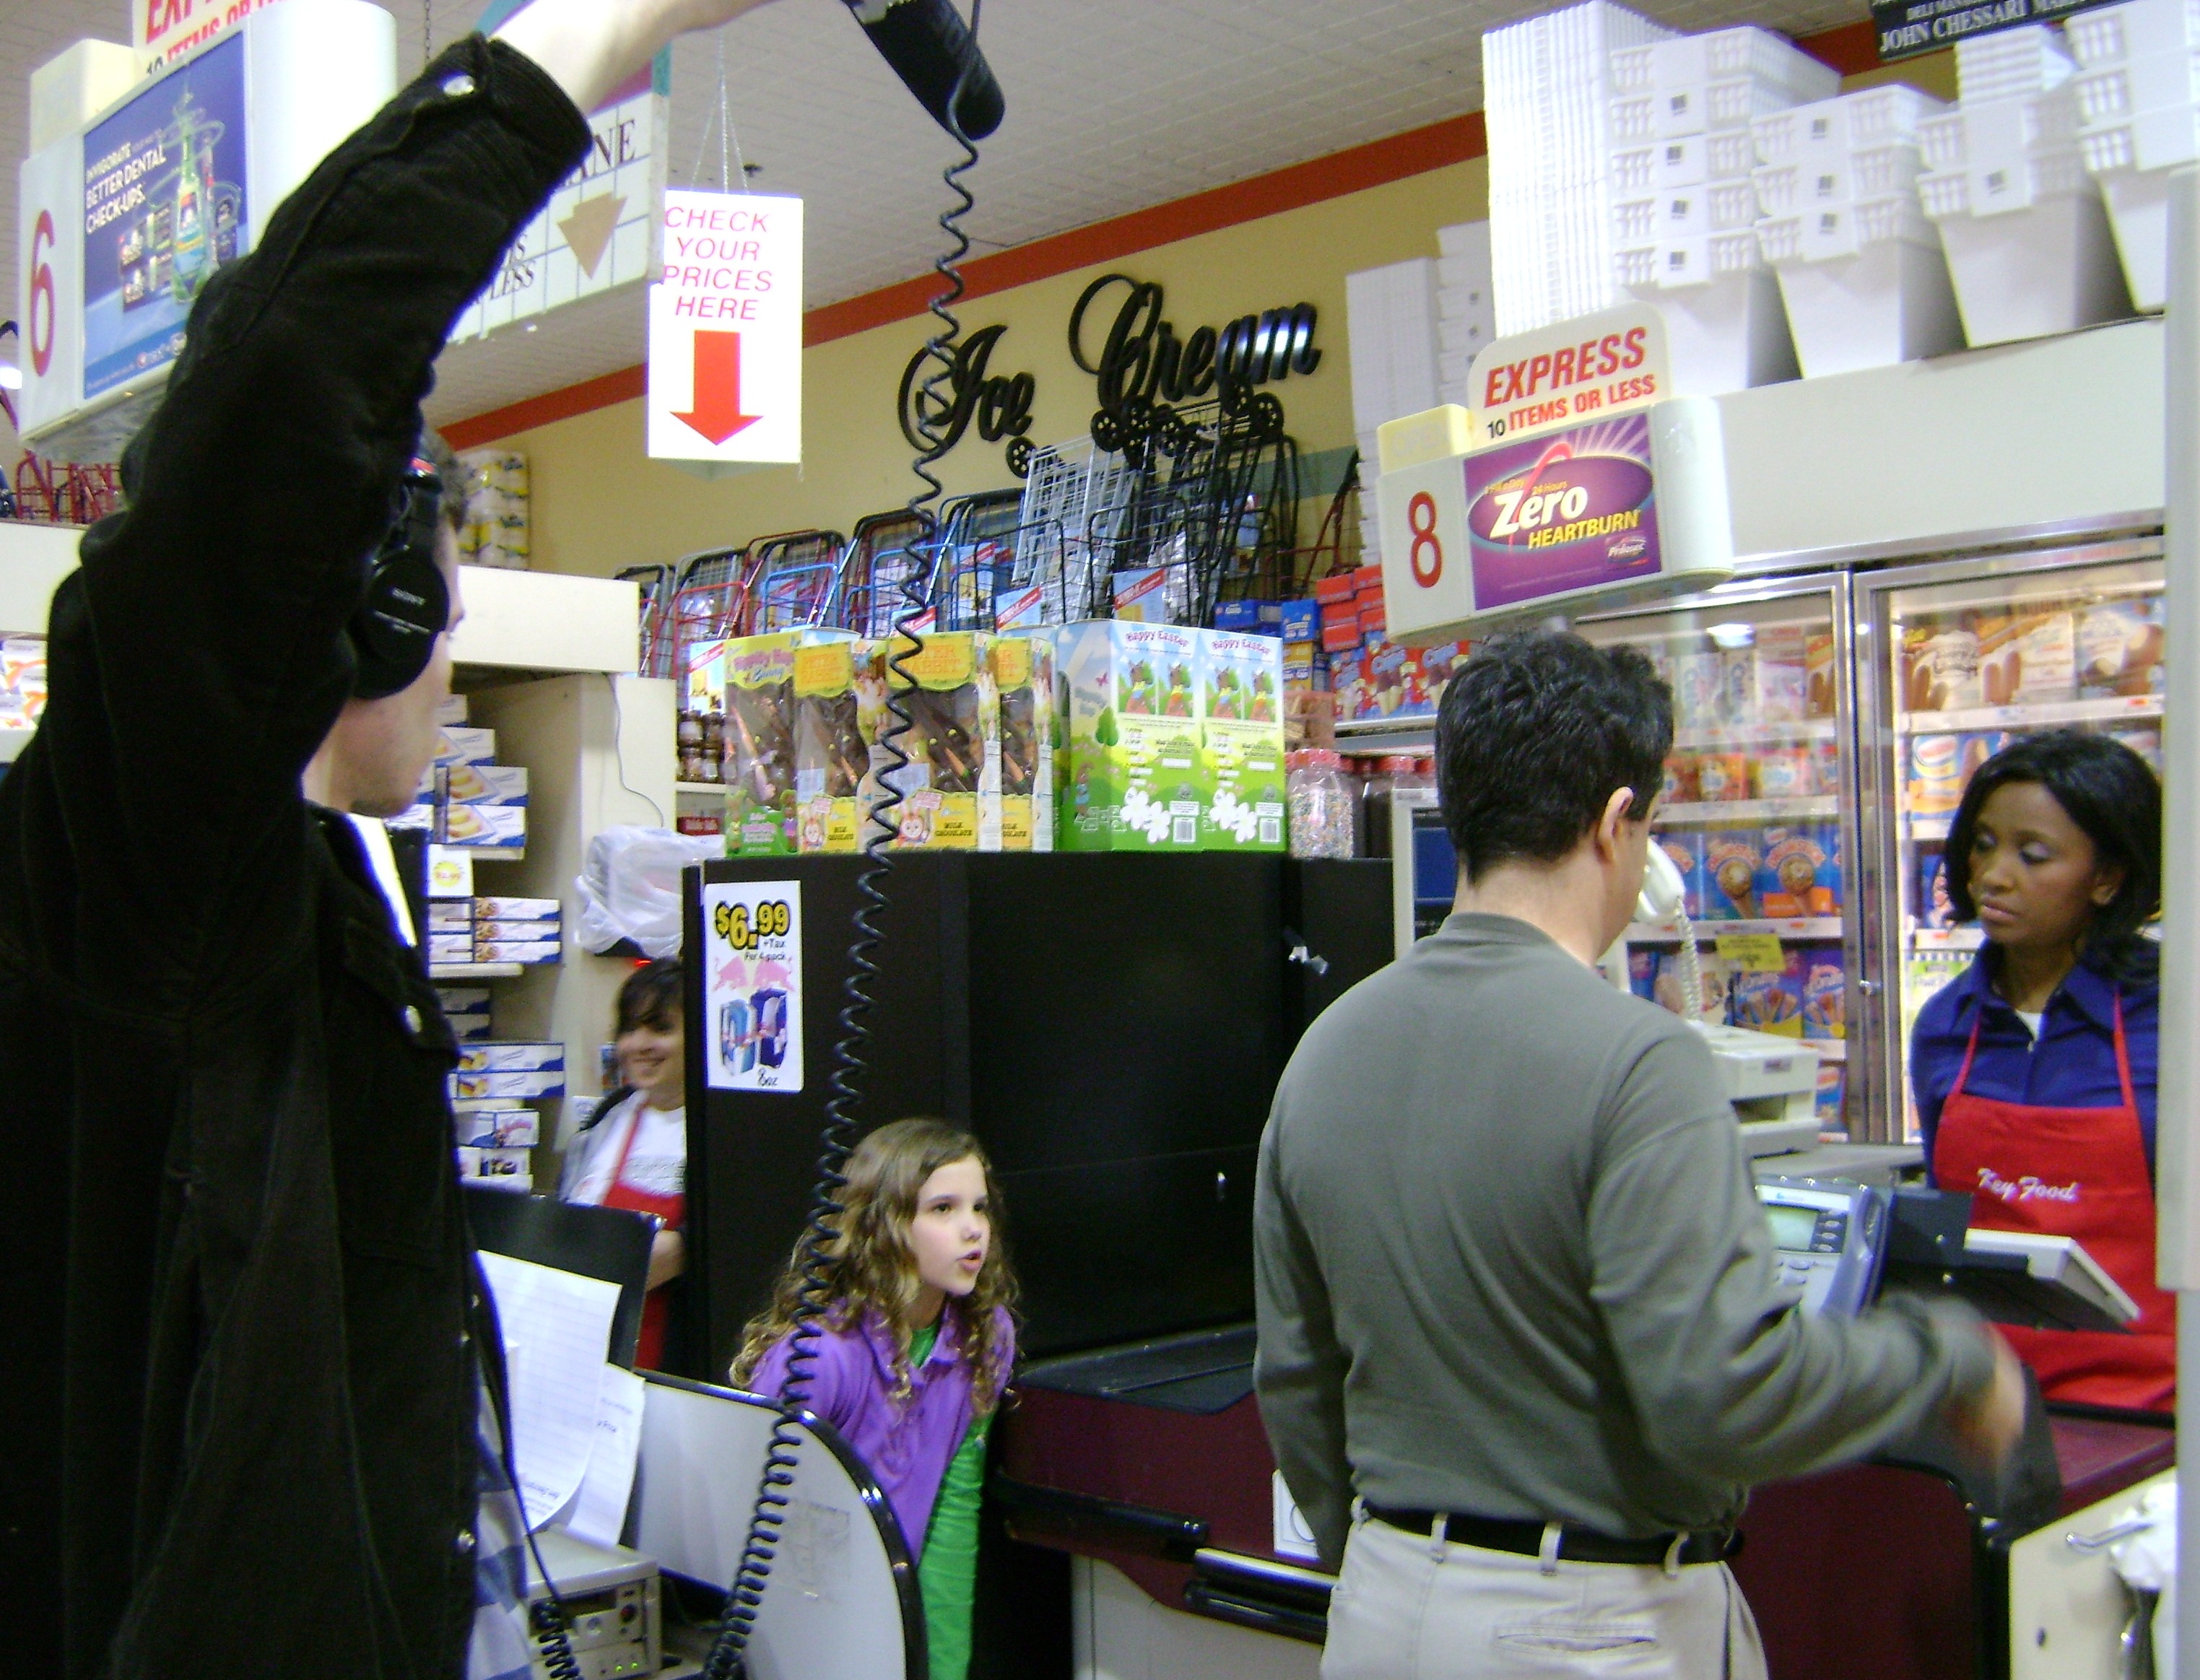 Leila in commercial scene for Stauffer's Animal Crackers with actors John Rant and Cathy Simmonds. Sound by Alex Syner.